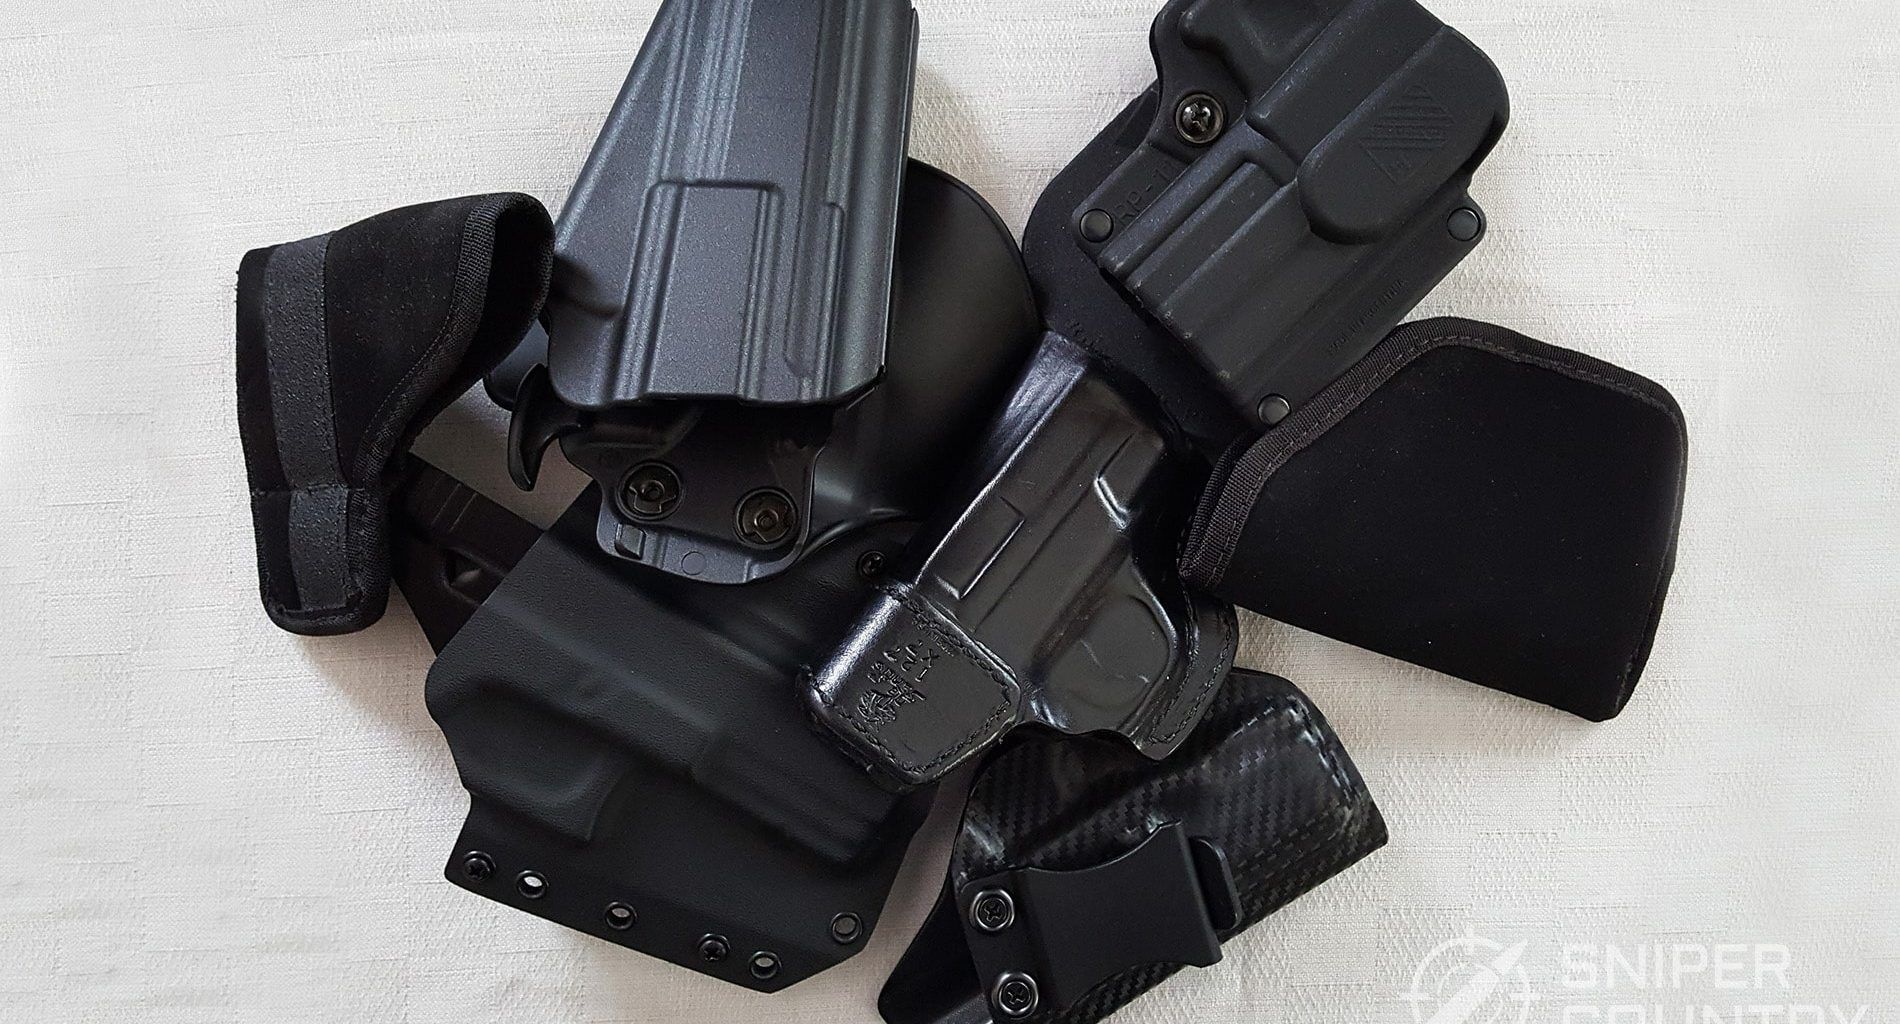 We The People Holsters - Did you get your hands on our Freedom